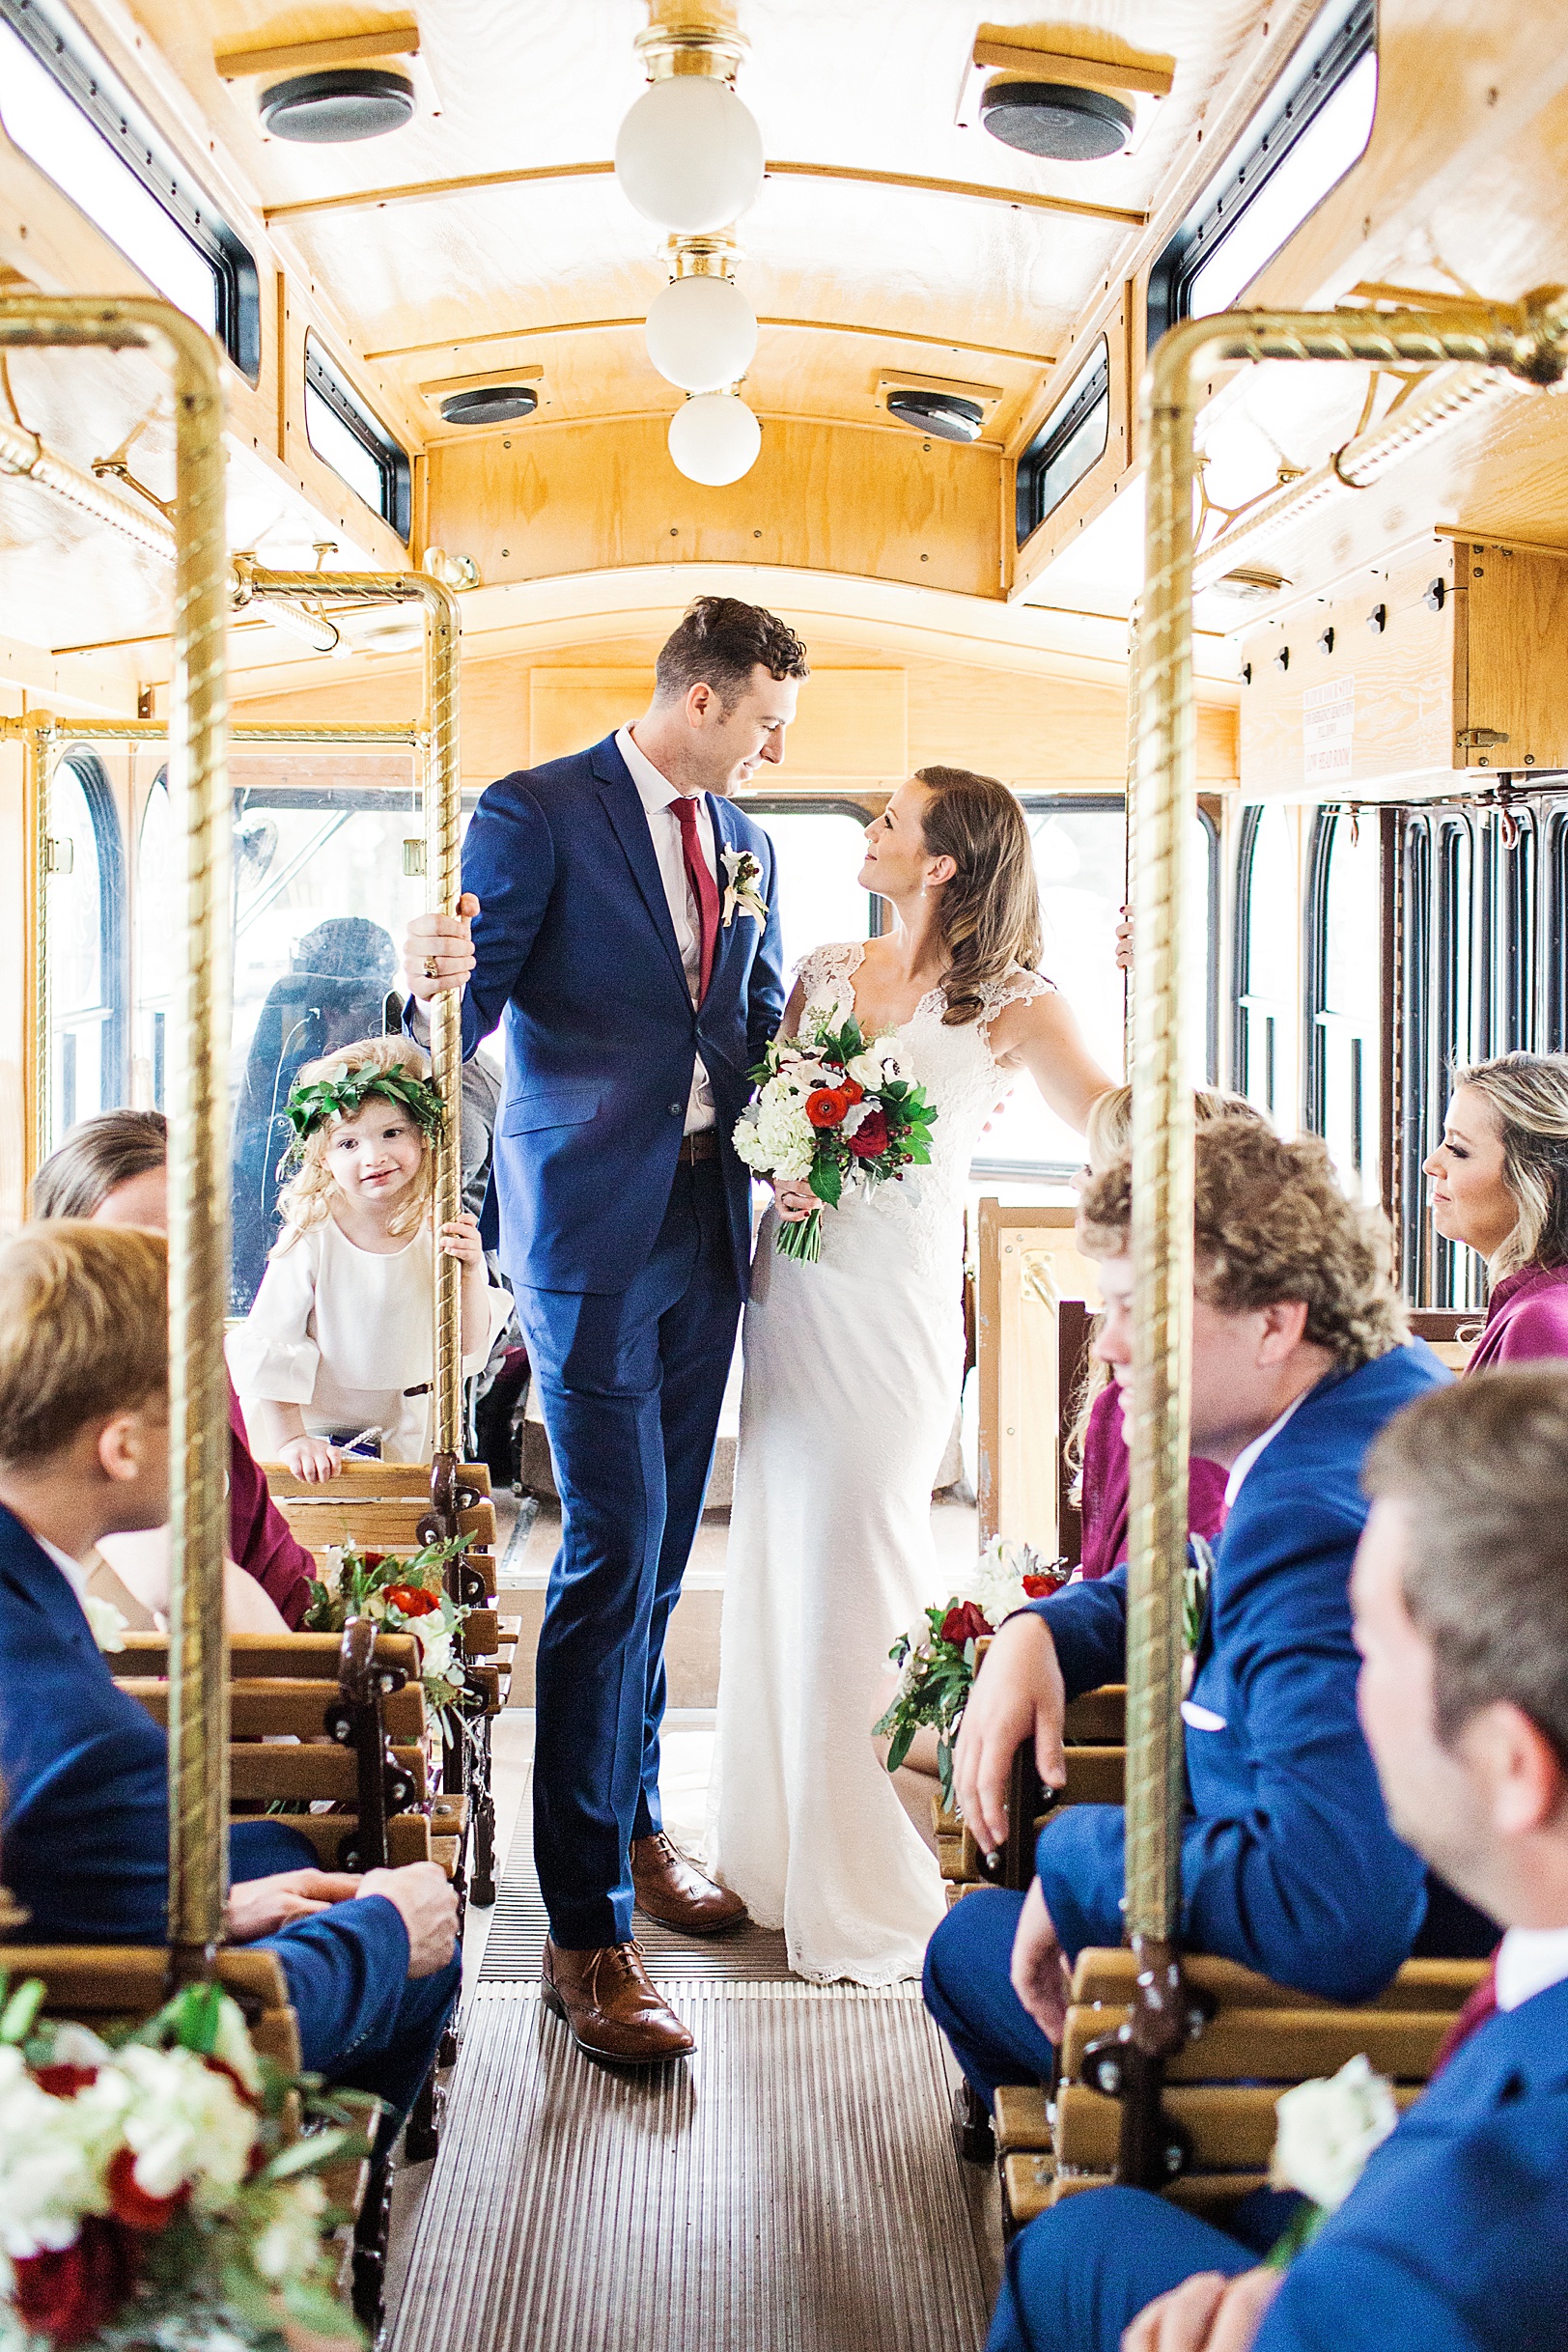 Lowcountry Trolley Wedding Portraits of Bride and Groom | Kaitlin Scott Photography